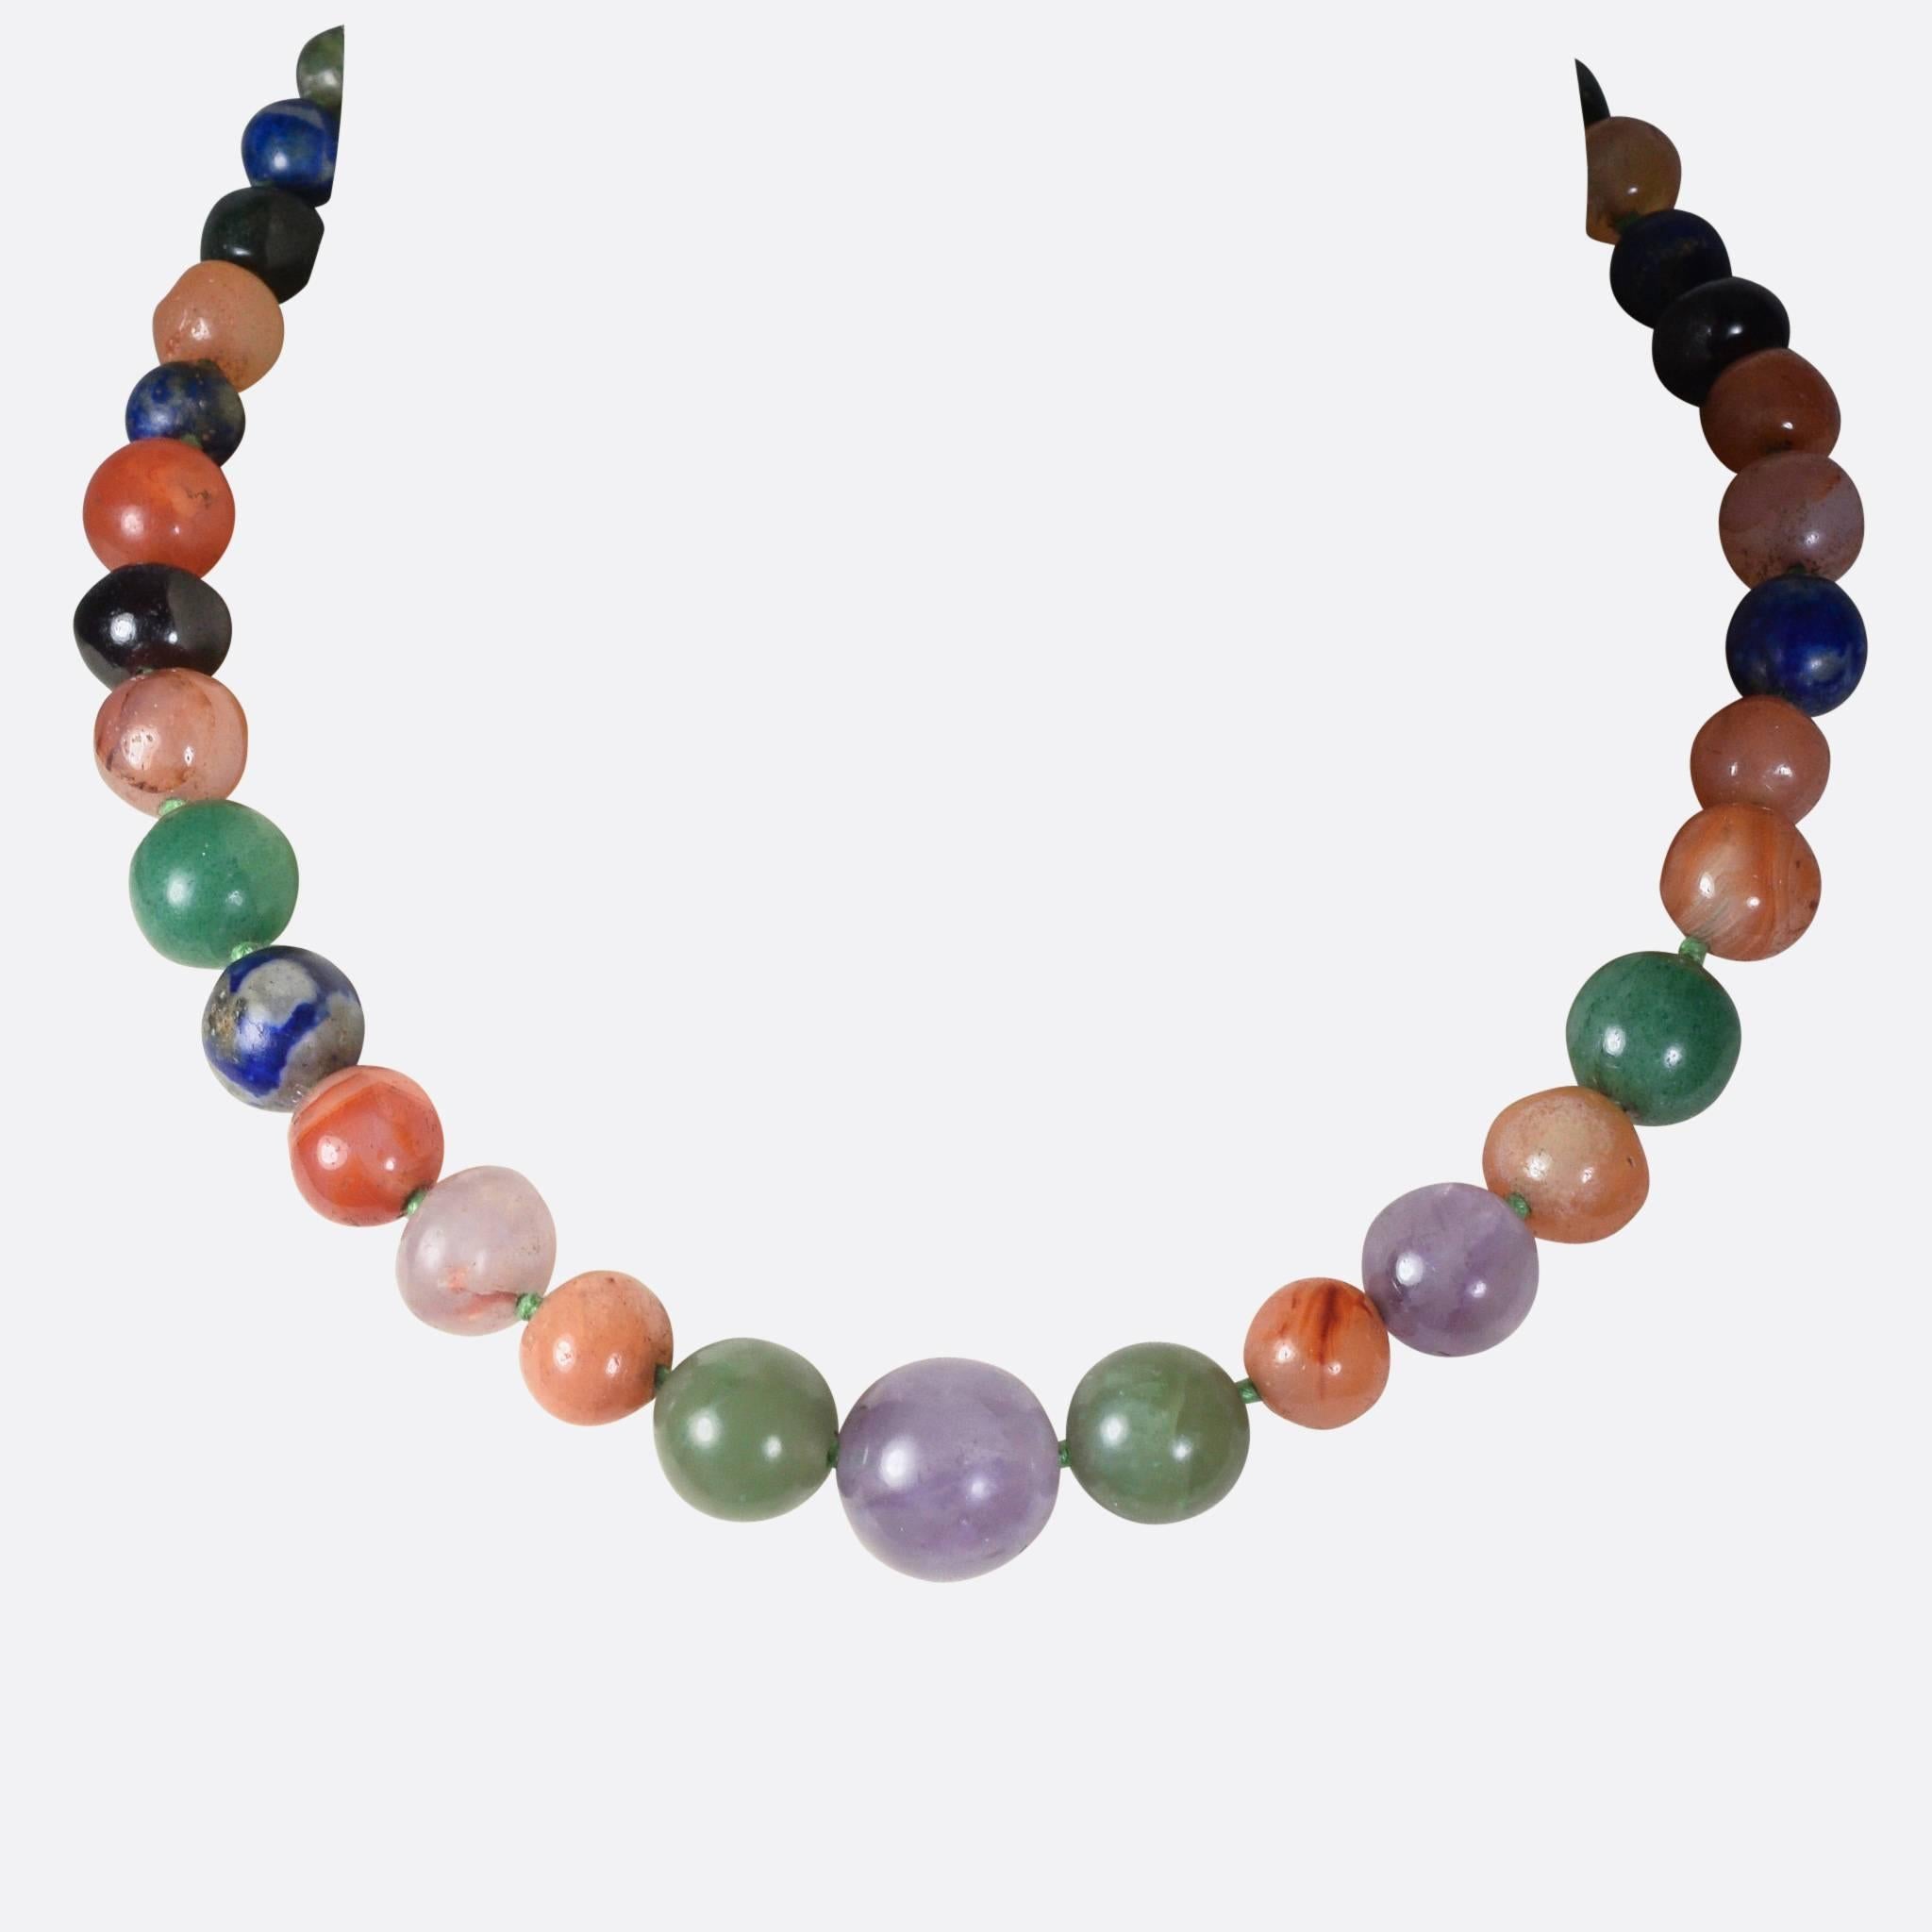 Women's Victorian Amethyst, Lapis and Agate Bead Necklace